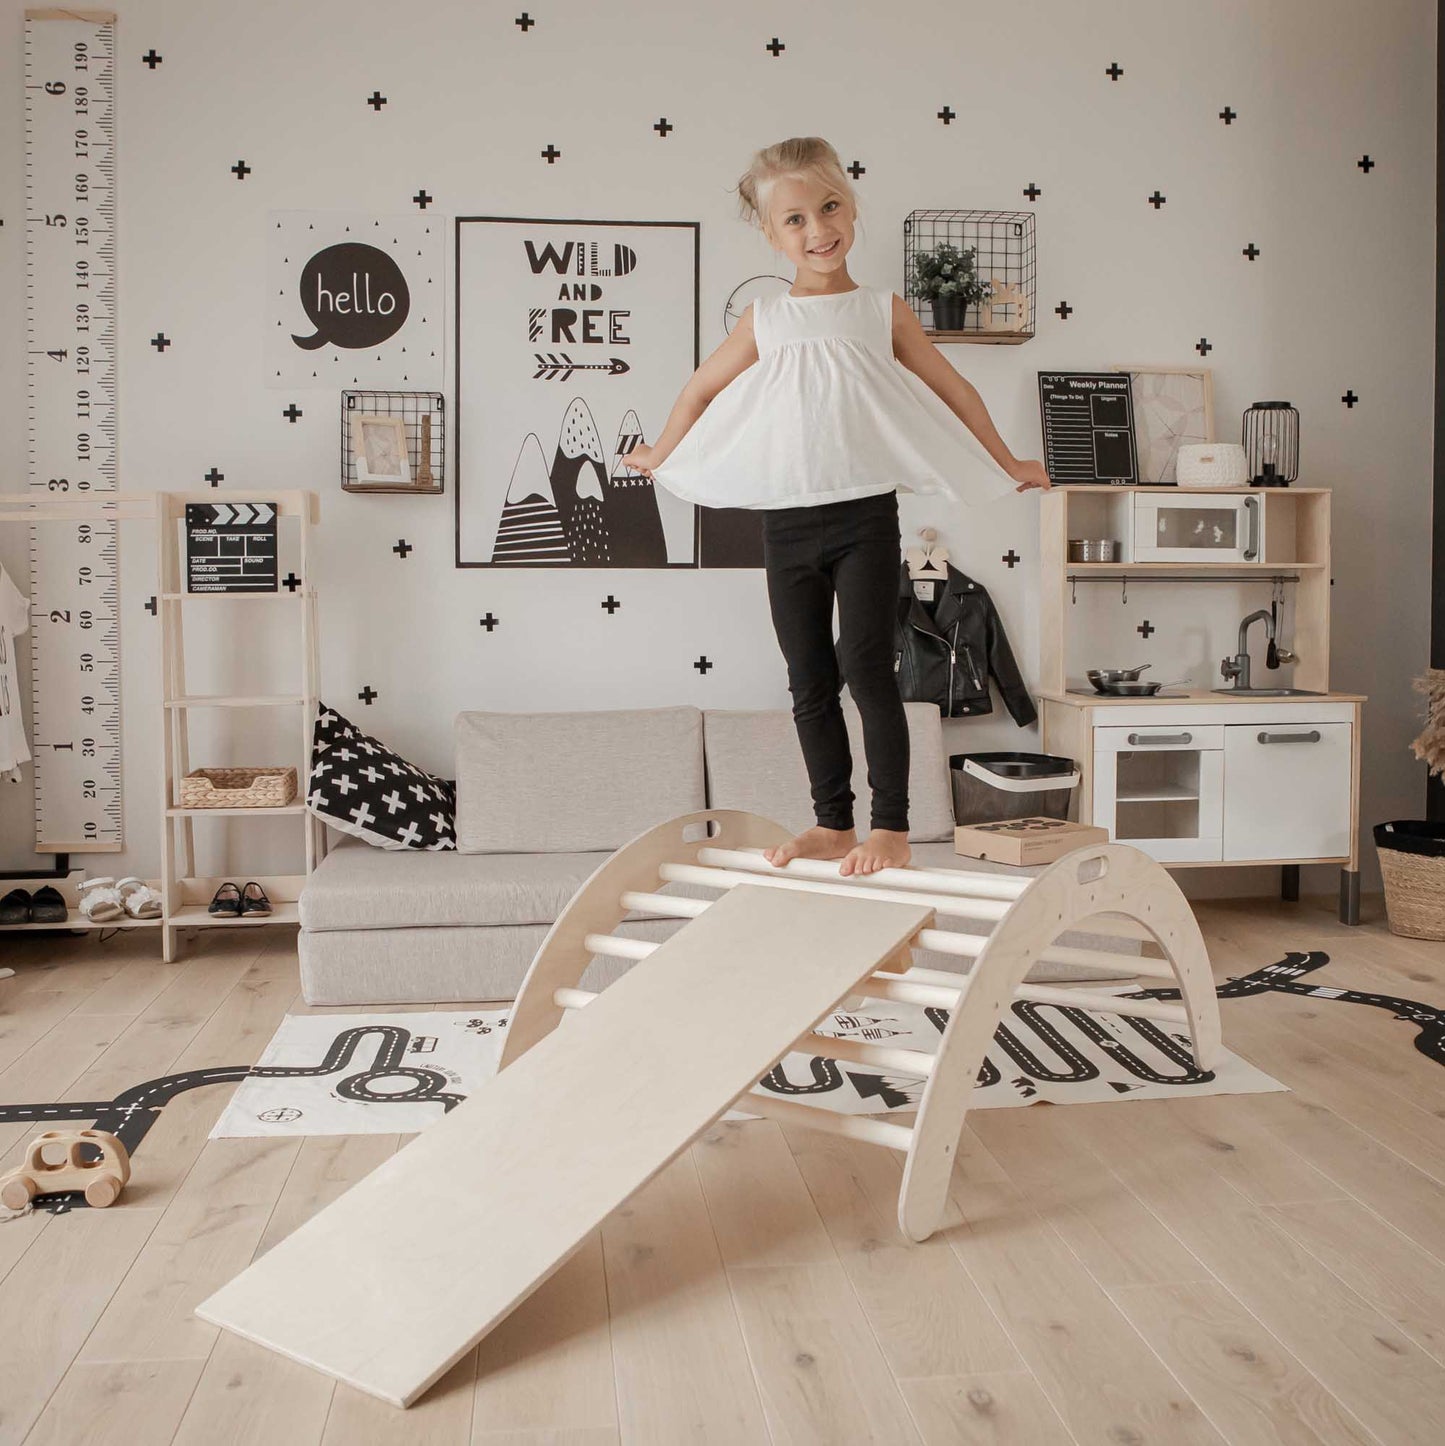 A little girl standing on a Climbing arch, Foldable climbing triangle, and a ramp in a child's room.